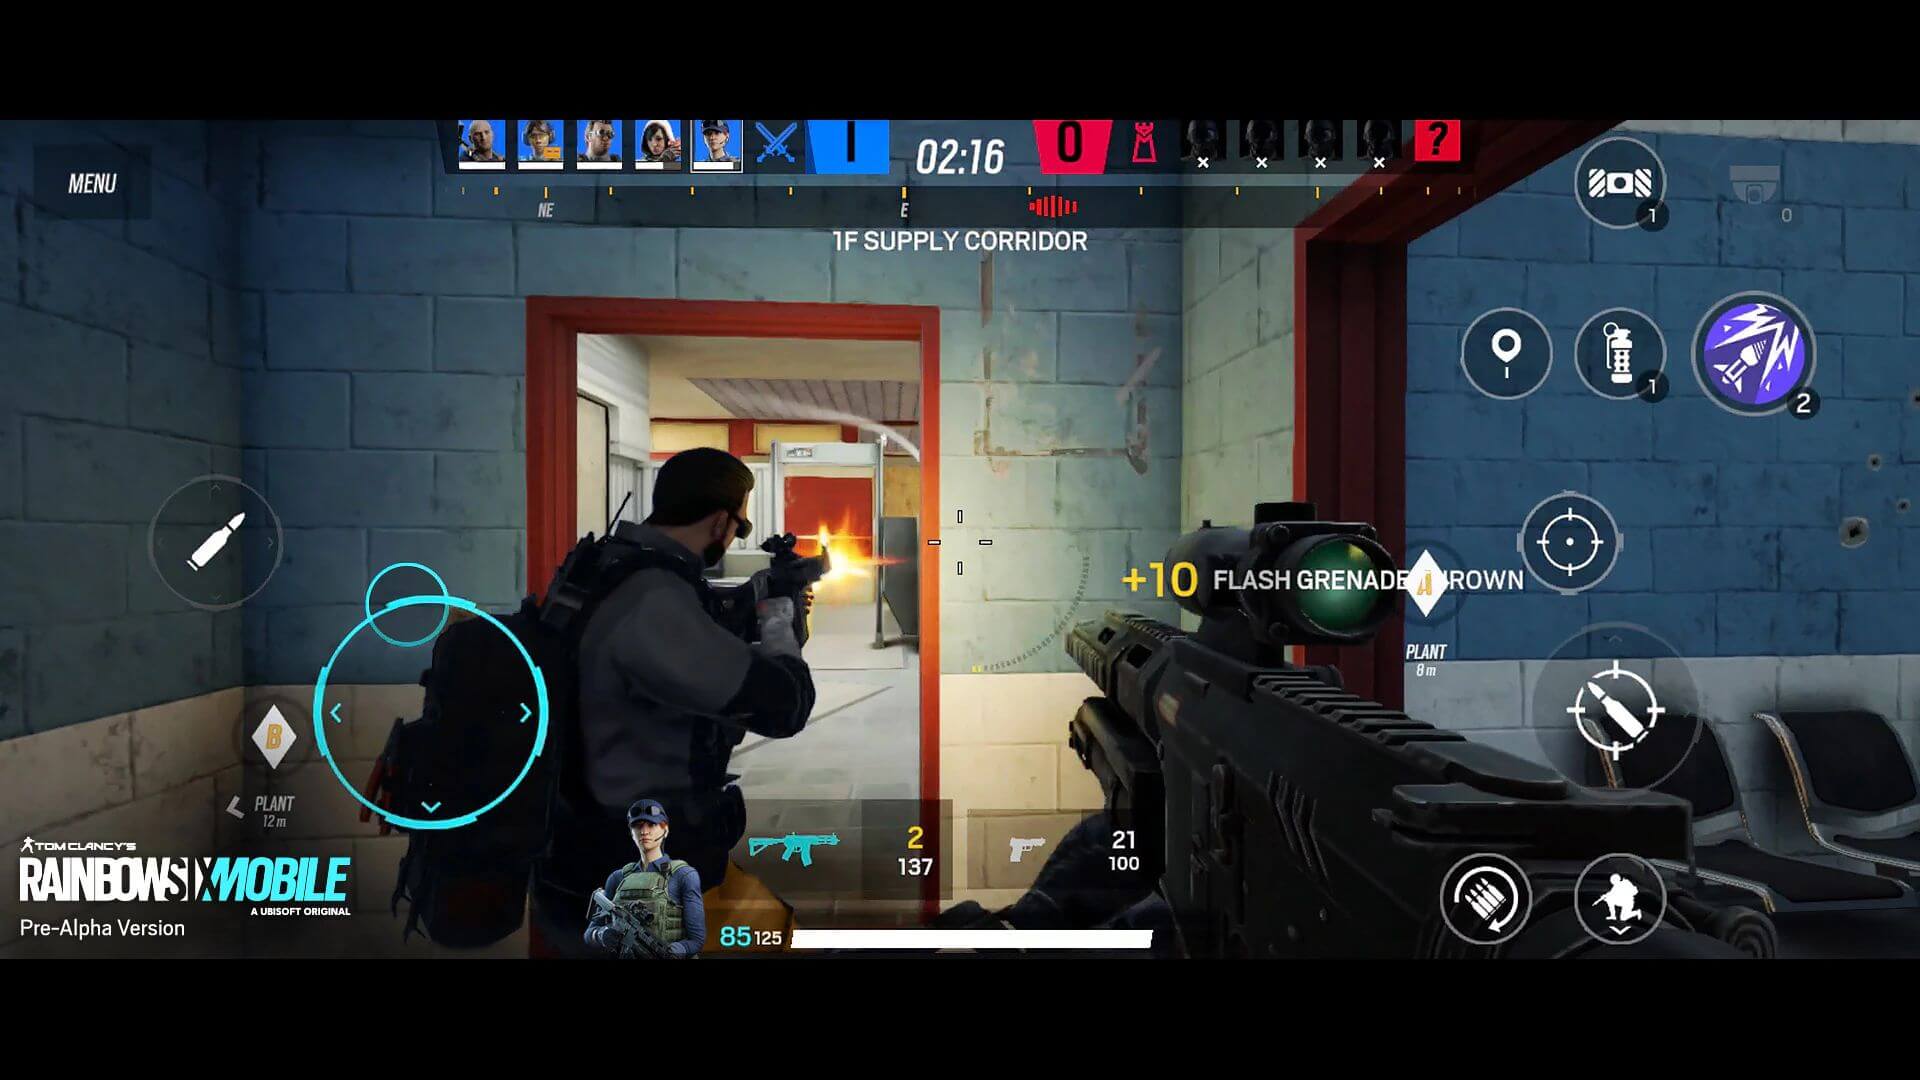 Rainbow Six Mobile v0.5.5 APK (Latest) Download for Android